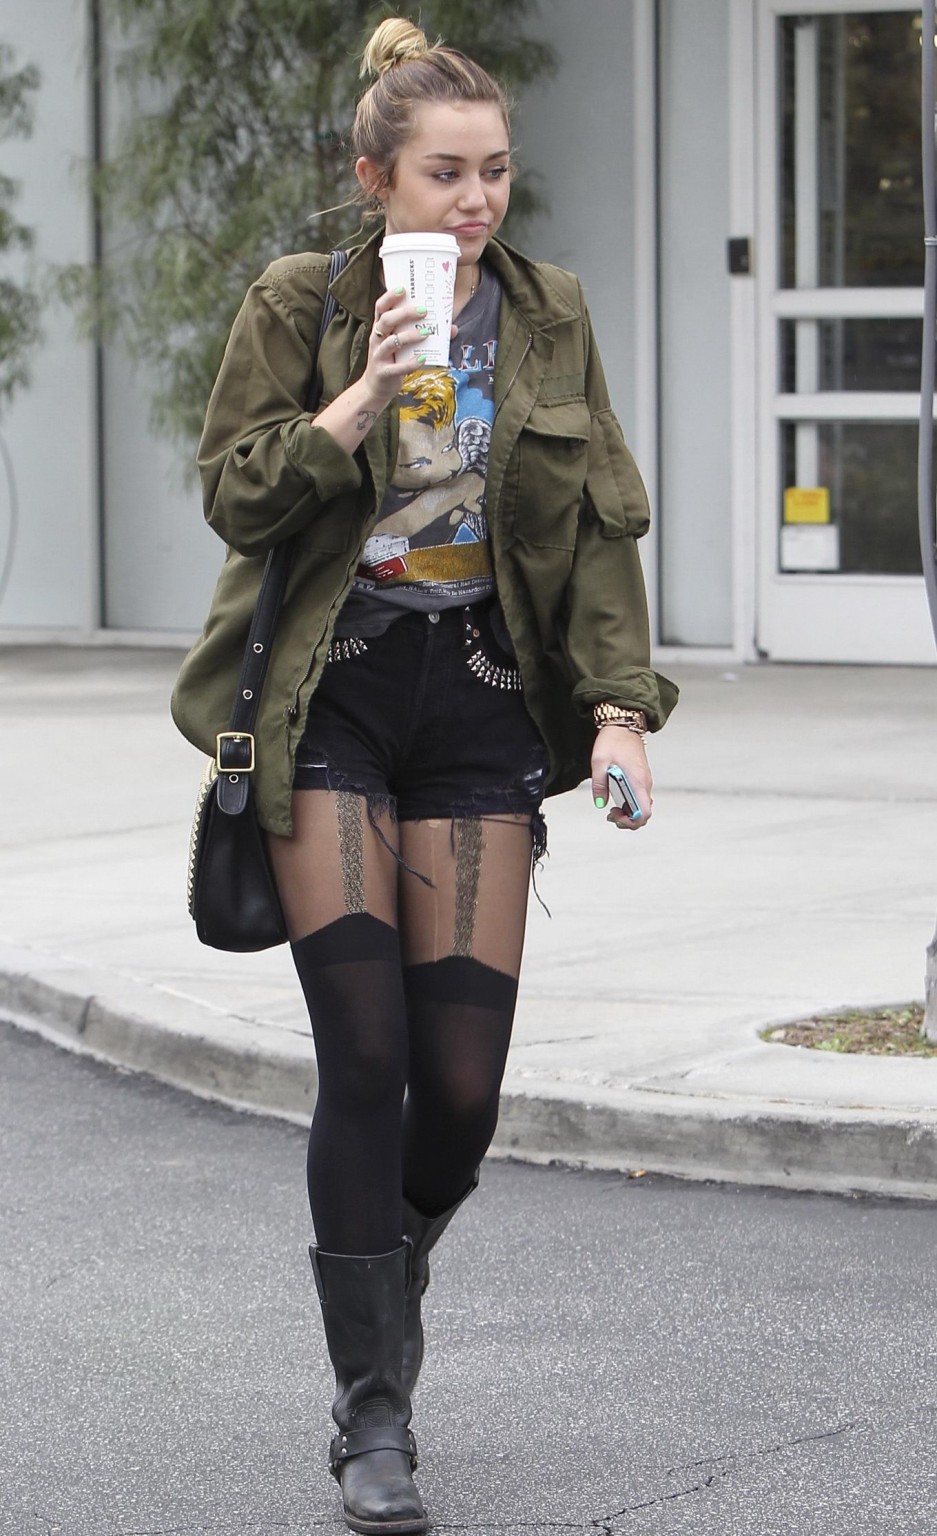 Miley cyrus leggy wearing stockings biker boots outside starbucks in hollywood
 #75274256